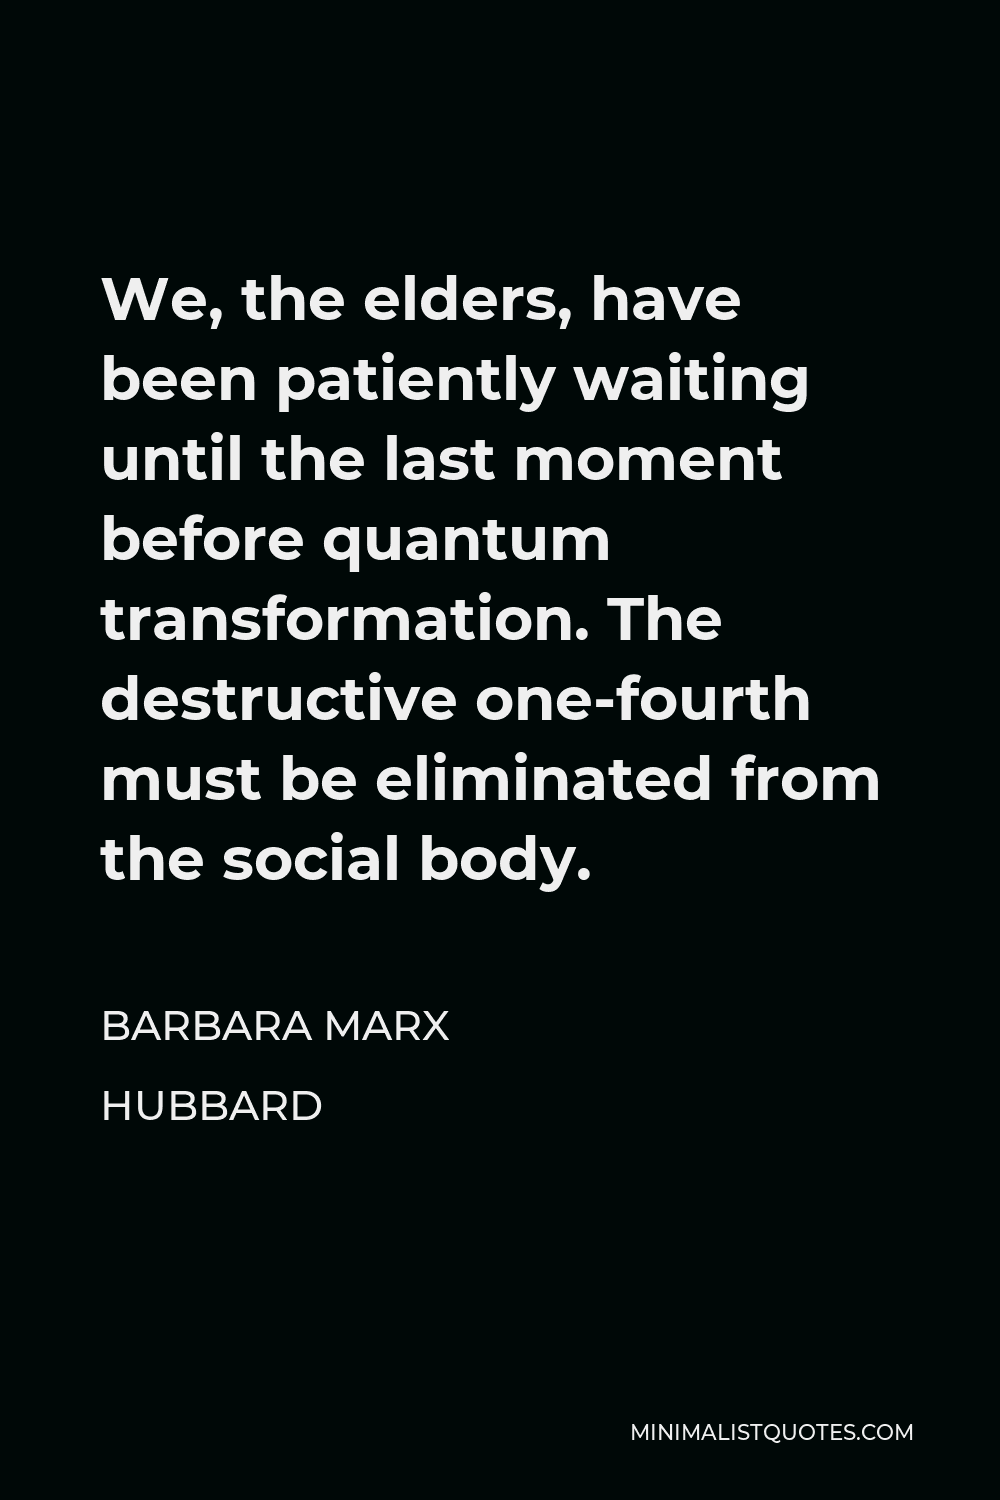 Barbara Marx Hubbard Quote - We, the elders, have been patiently waiting until the last moment before quantum transformation. The destructive one-fourth must be eliminated from the social body.